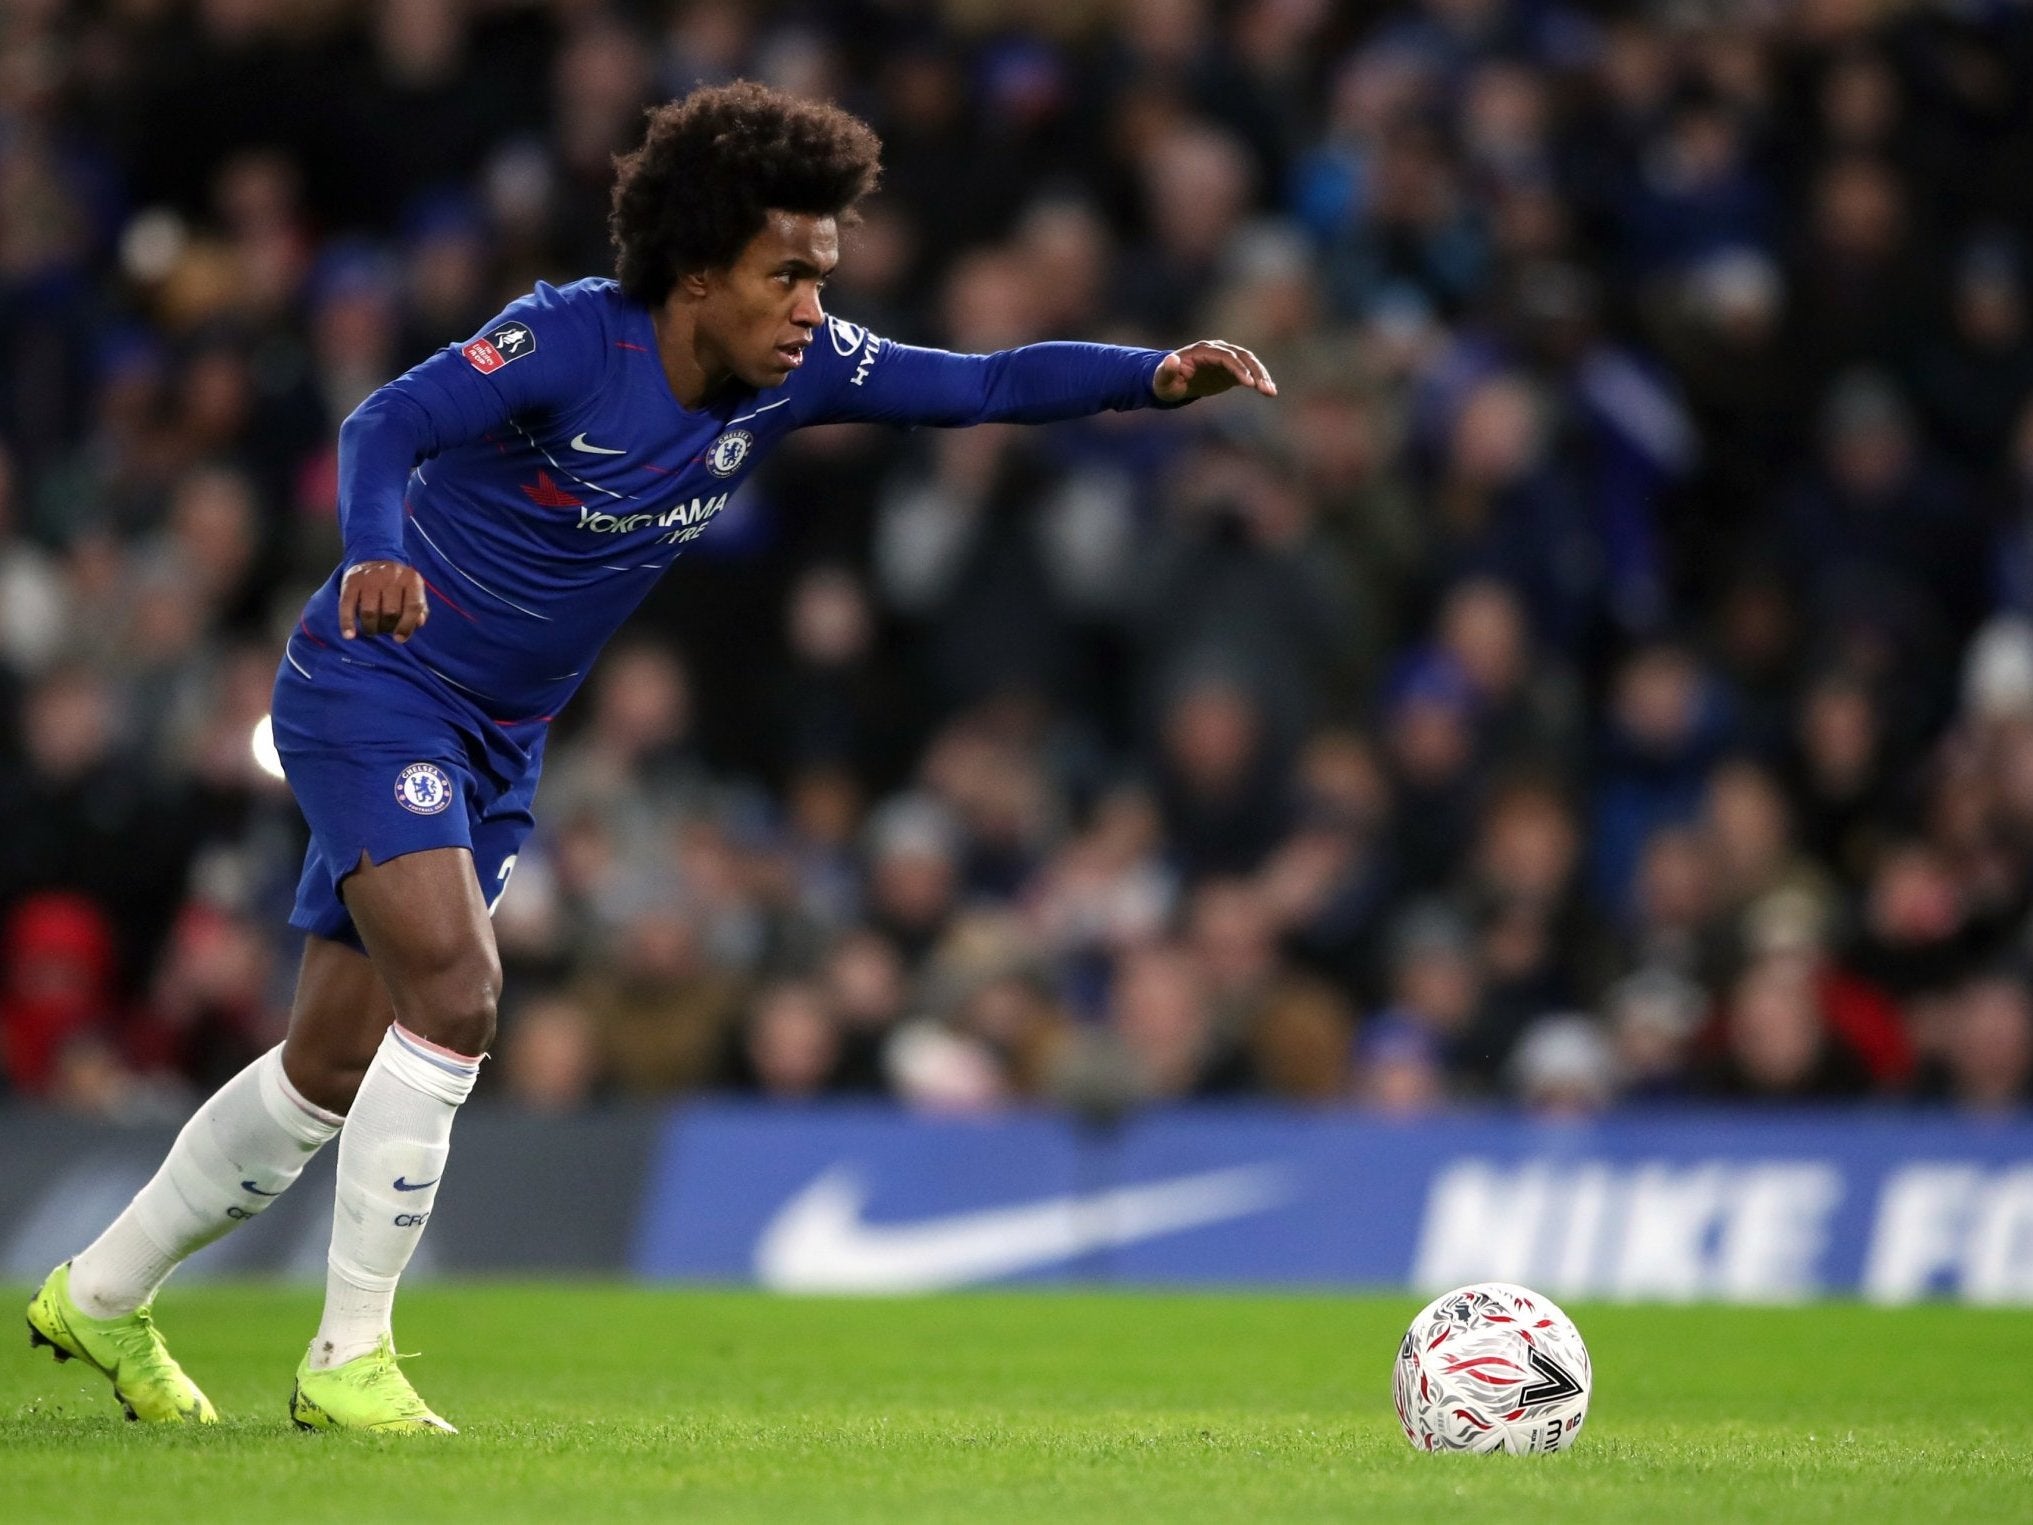 Willian runs up to score from the penalty spot